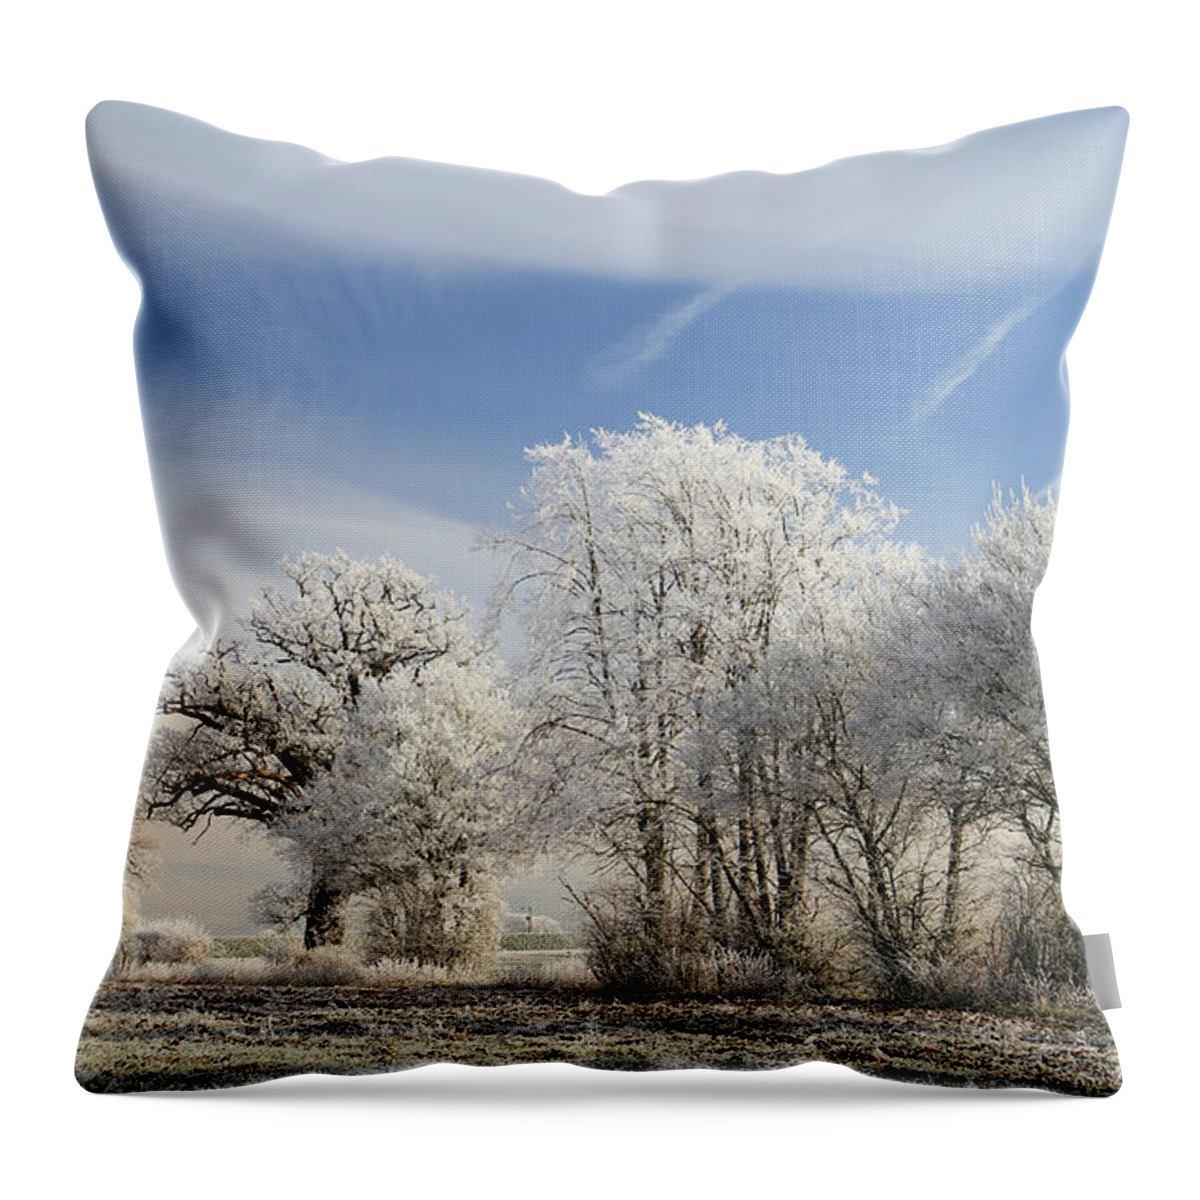 Tranquility Throw Pillow featuring the photograph Hoar Frost On Trees In Winter by © Jackie Bale